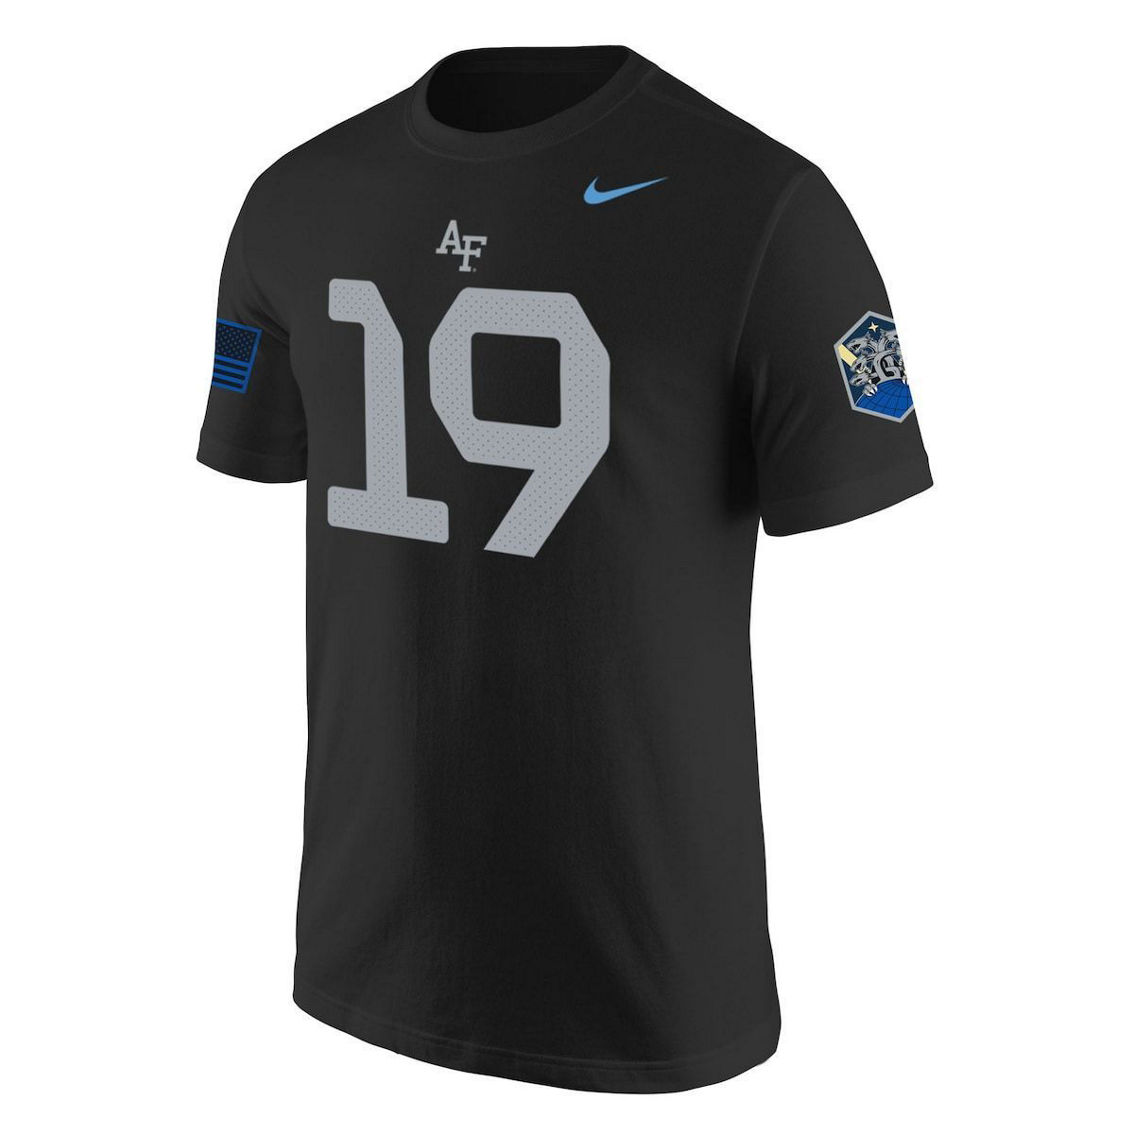 Nike Men's #1 Black Air Force Falcons Space Force Rivalry Replica Jersey T-Shirt - Image 3 of 4